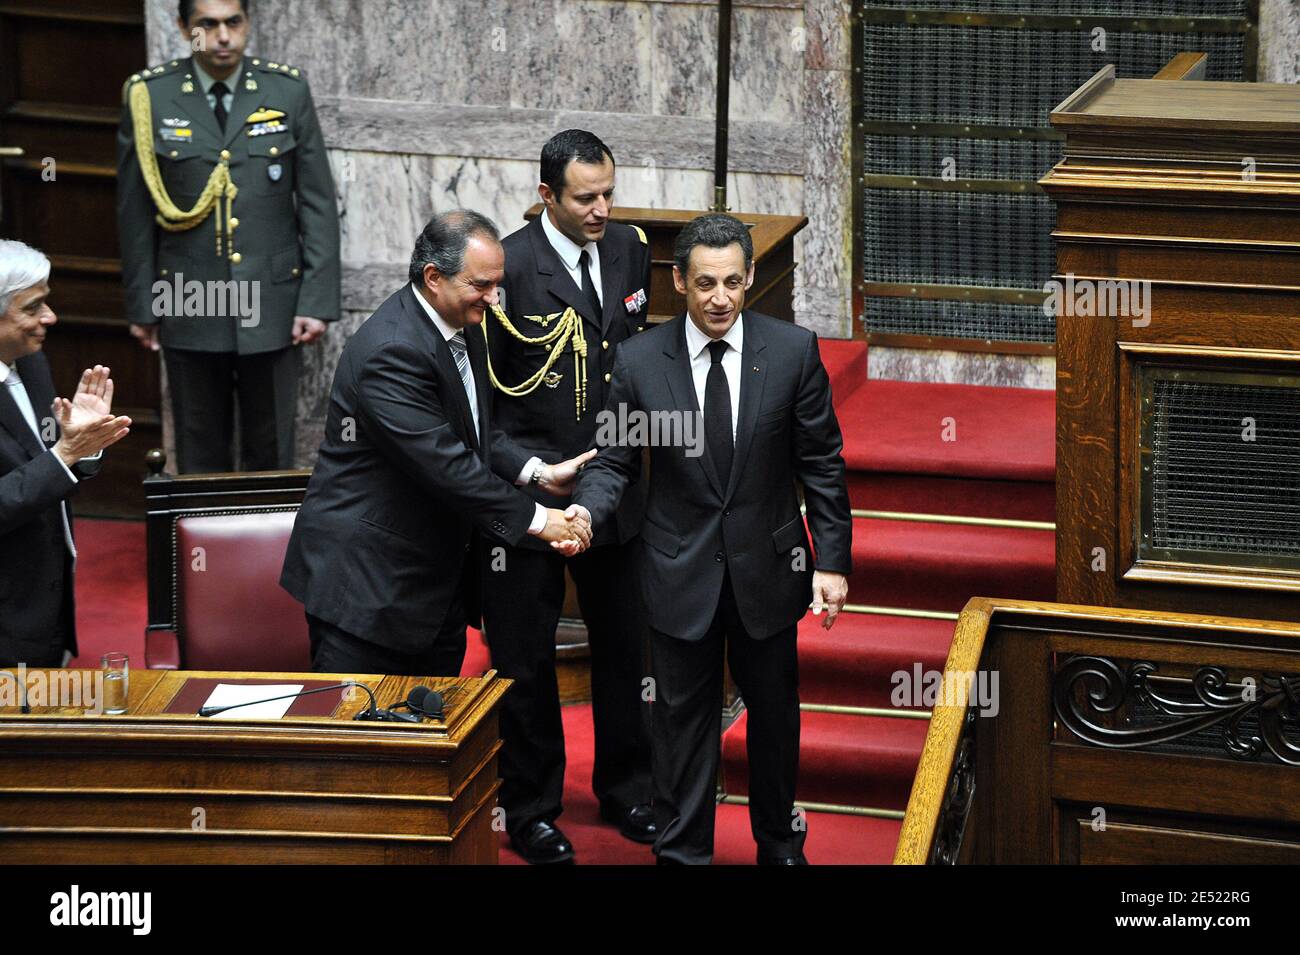 Greek Prime Minister Costas Karamanlis greets French President Nicolas Sarkozy at the parliament in Athens in Athens, Greece on June 6, 2008. Sarkozy arrived in Greece Friday for an official visit, the first by a French head of state in more than 25 years. Sarkozy was addressing the Greek parliament in a ceremony only accorded to three foreign presidents in the past: his predecessor Charles de Gaulle and US presidents Dwight Eisenhower and George Bush Sr. Photo by Mousse/ABACAPRESS.COM Stock Photo